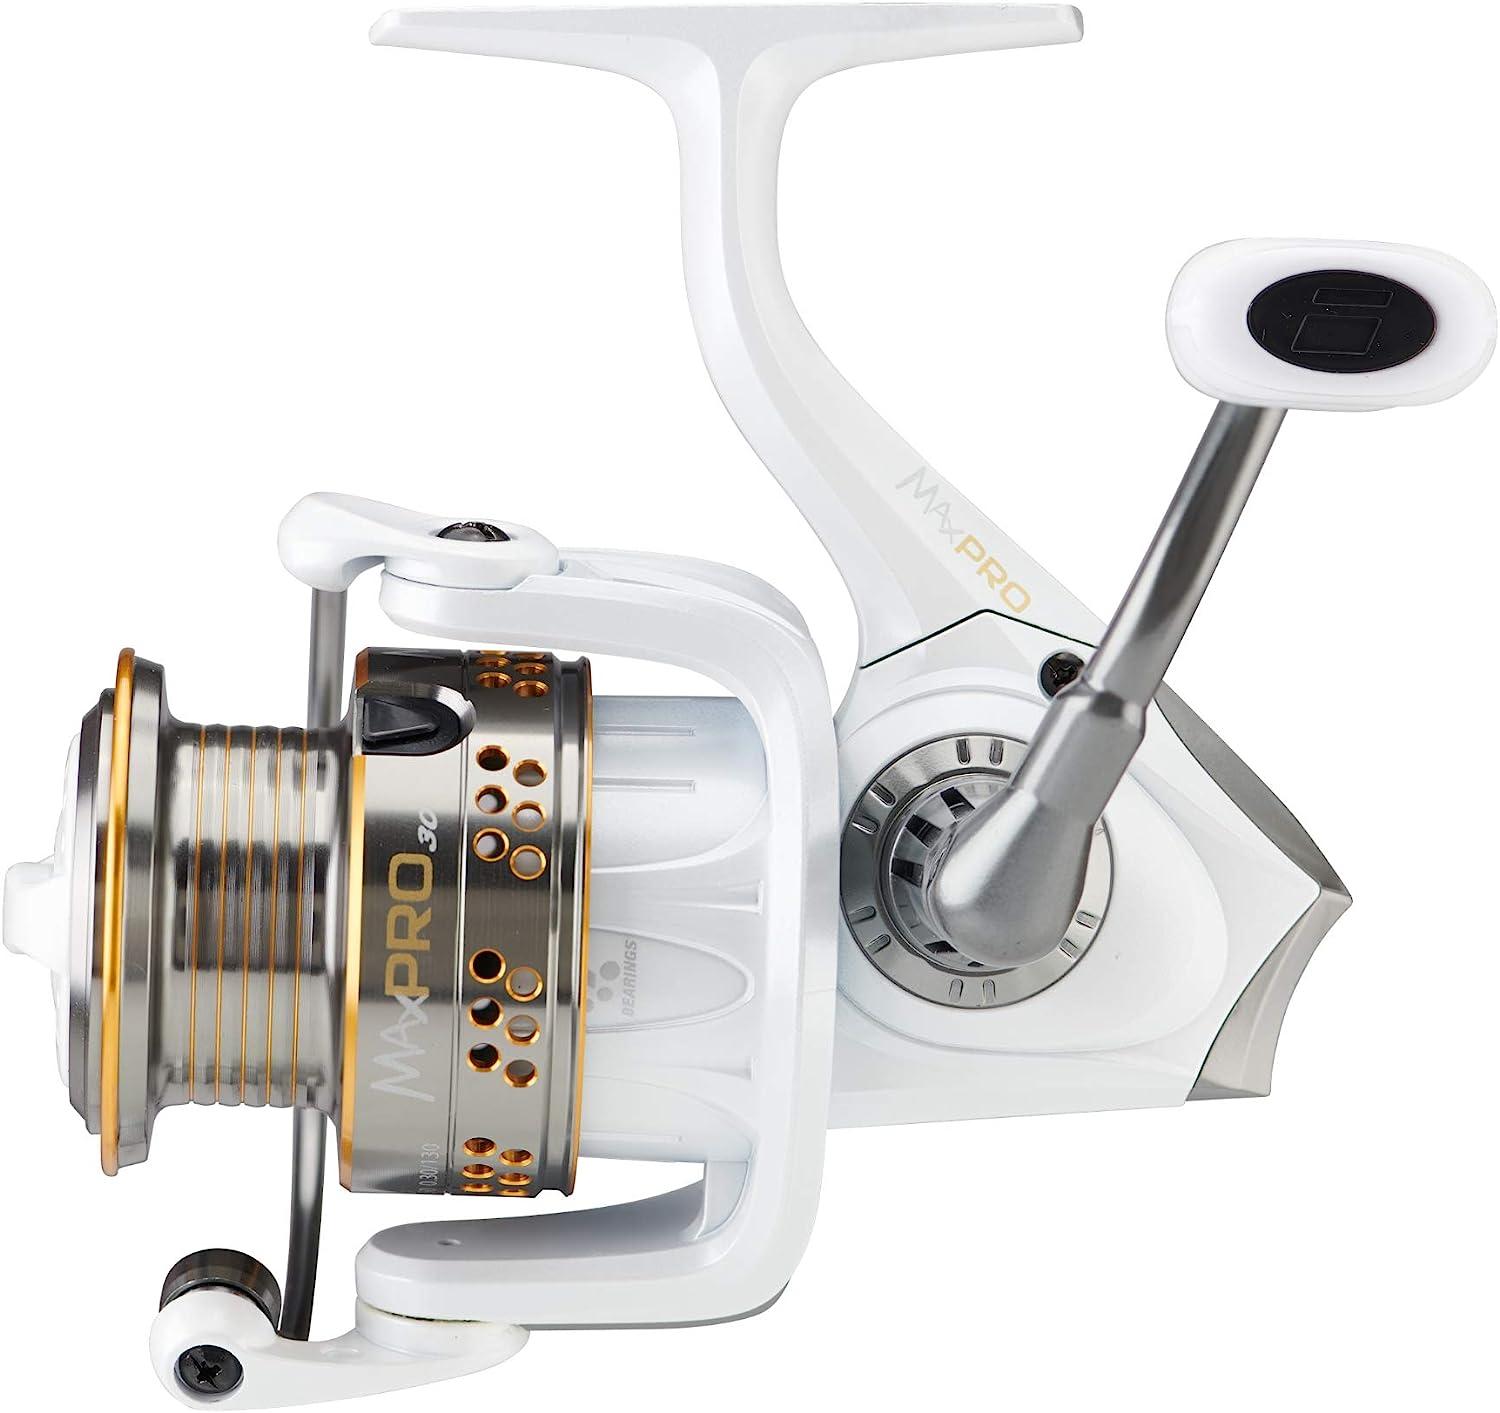 Abu Garcia Max Pro Spinning Reel, Size 60, Right/Left Handle